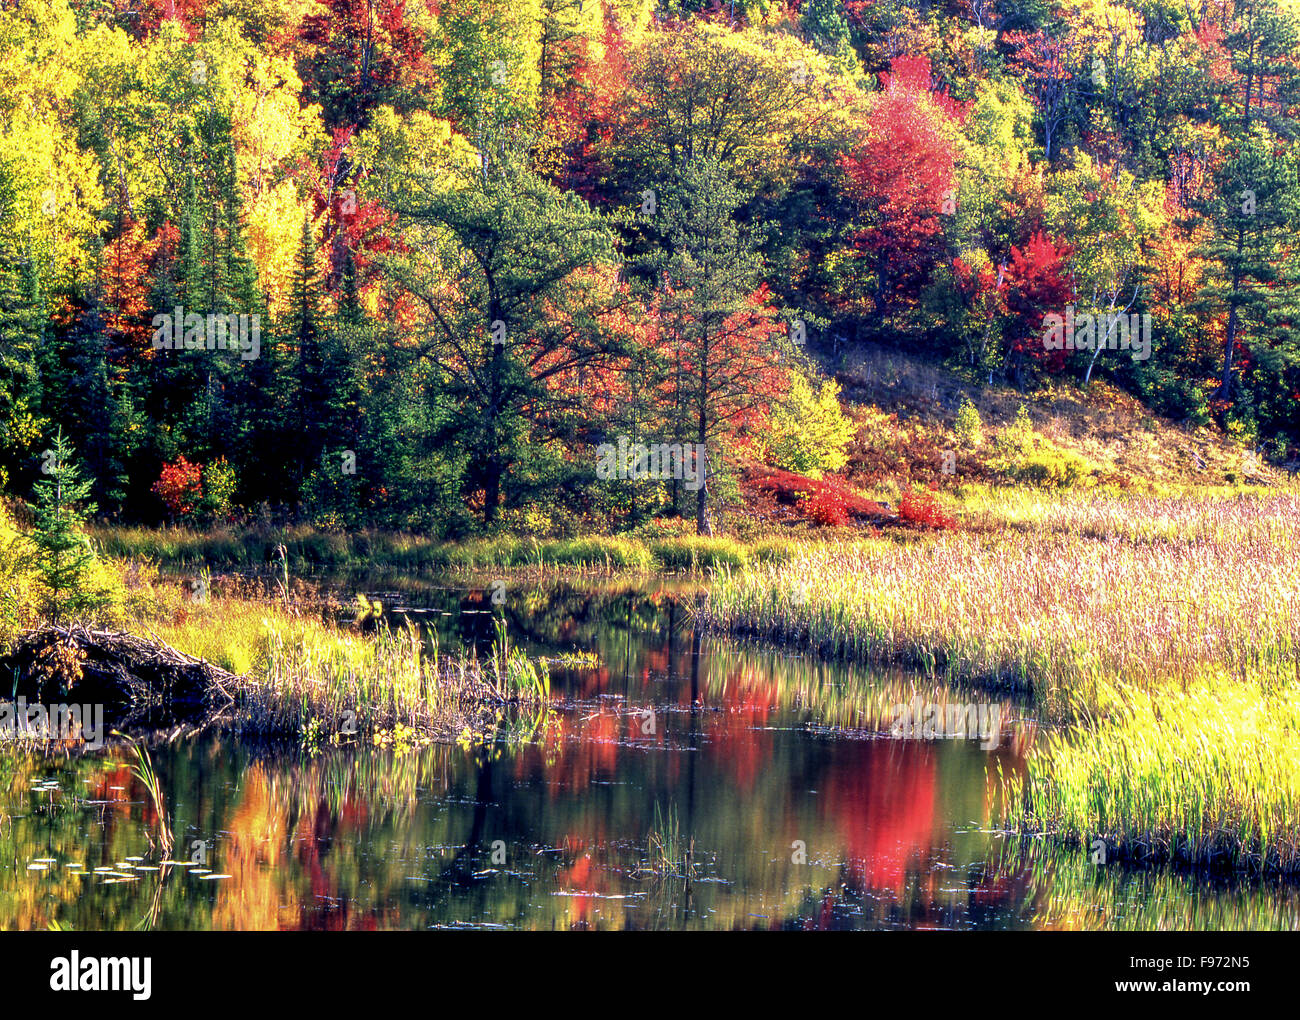 Autumn forest reflected in wetland, Lively, Ontario, Canada Stock Photo